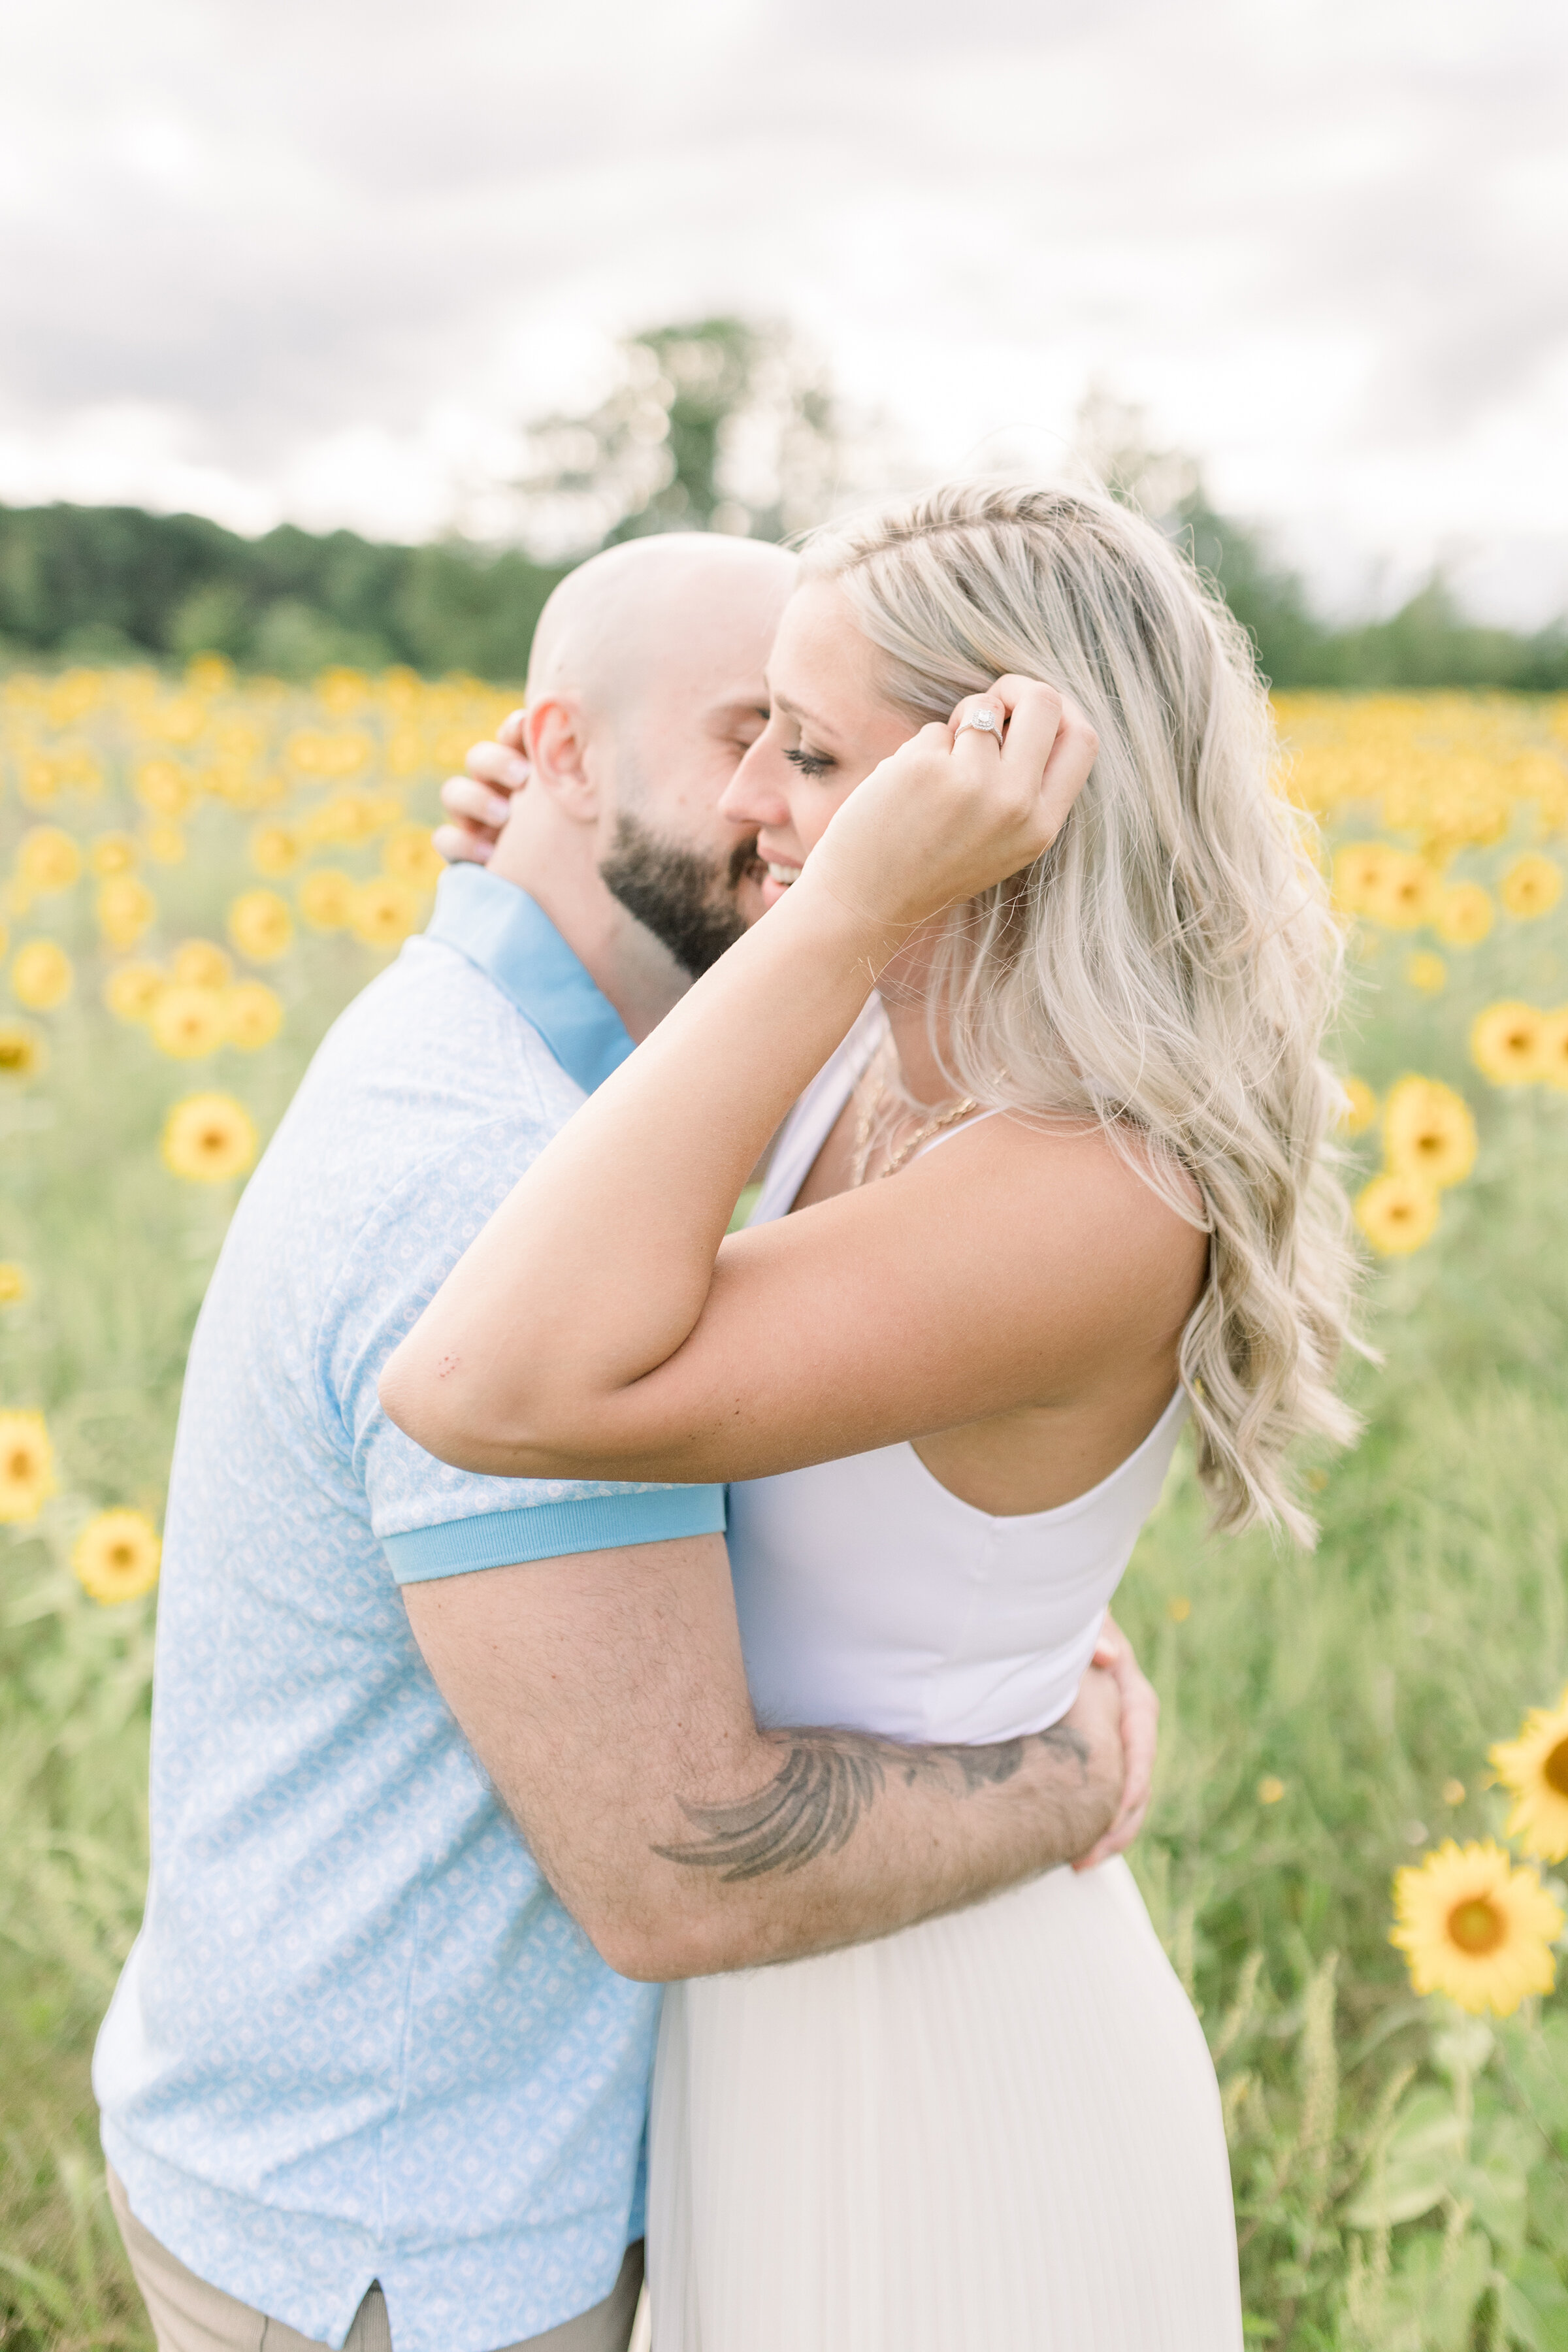  A handsome man kisses his soon to be wife on the cheek as she pushes she hair aside in a beautiful Ottawa, Ontario engagement session by Chelsea Mason Photography. Professional engagement photographer couple goals couple pose inspiration ideas and g